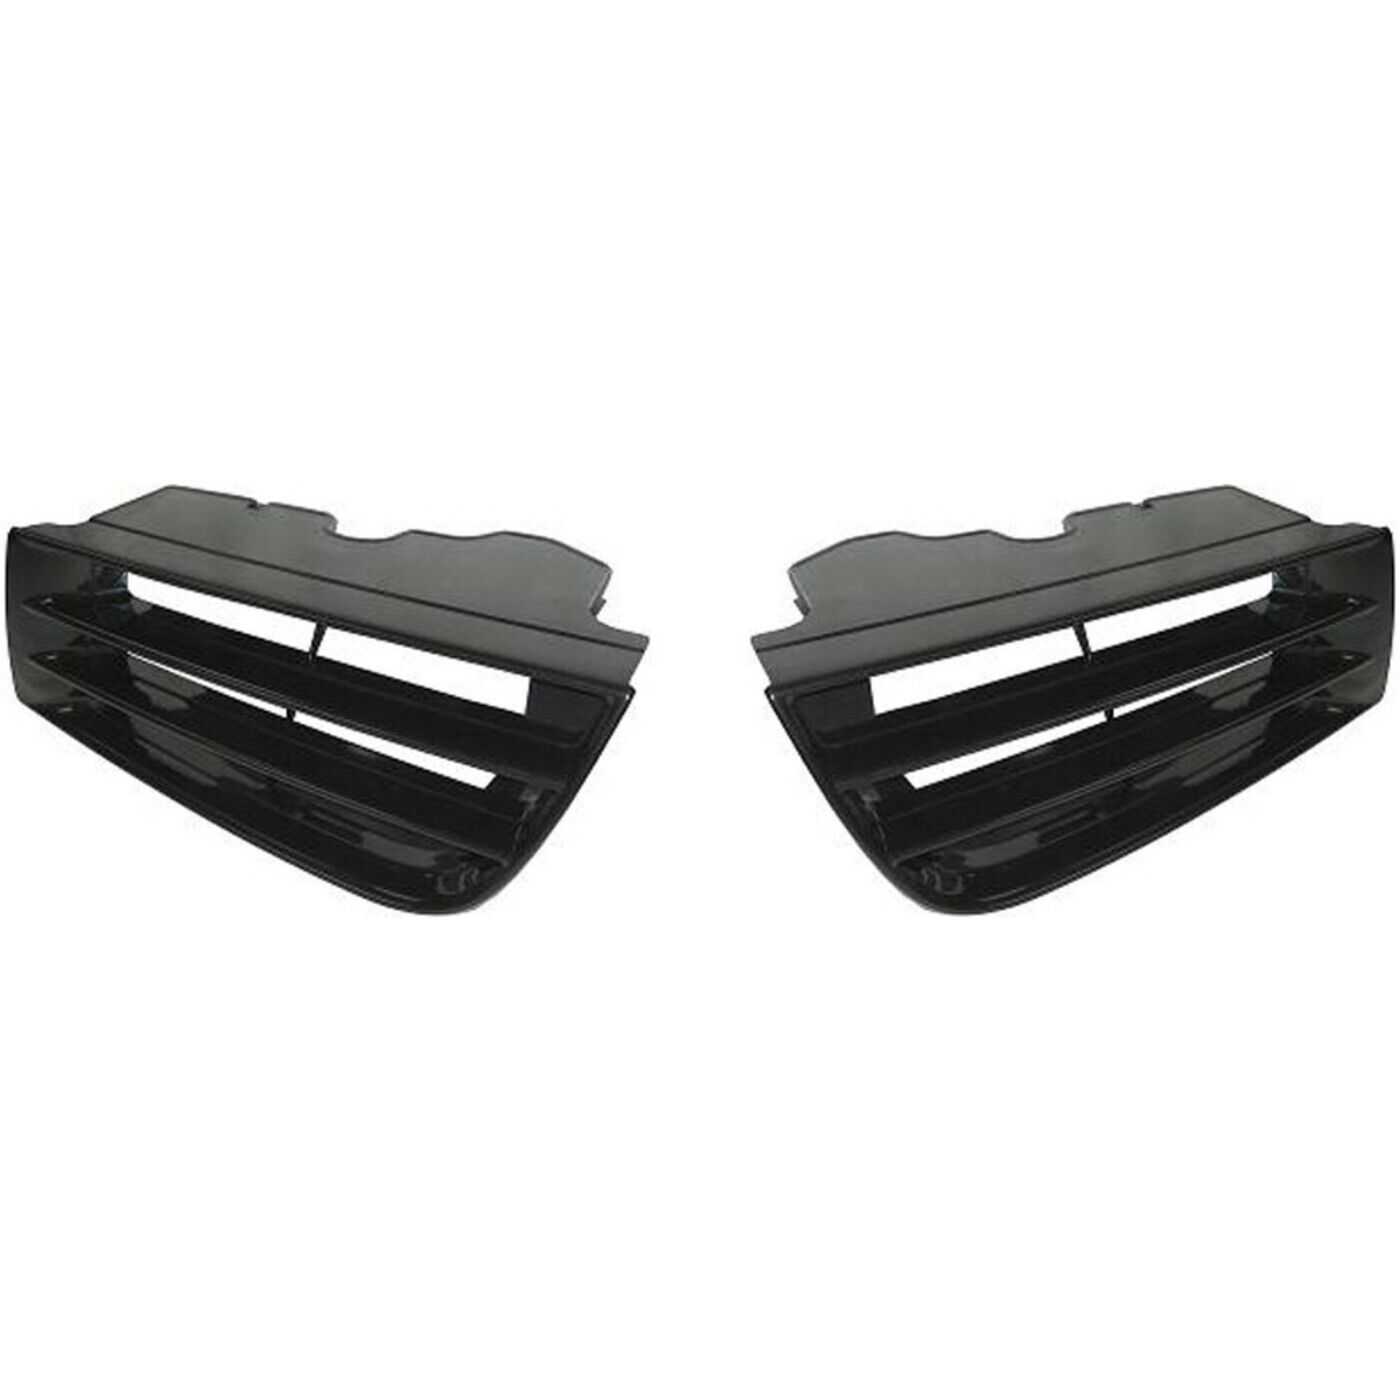 Grille For 2002-2003 Mitsubishi Galant Set of 2 Left & Right Side Black Plastic